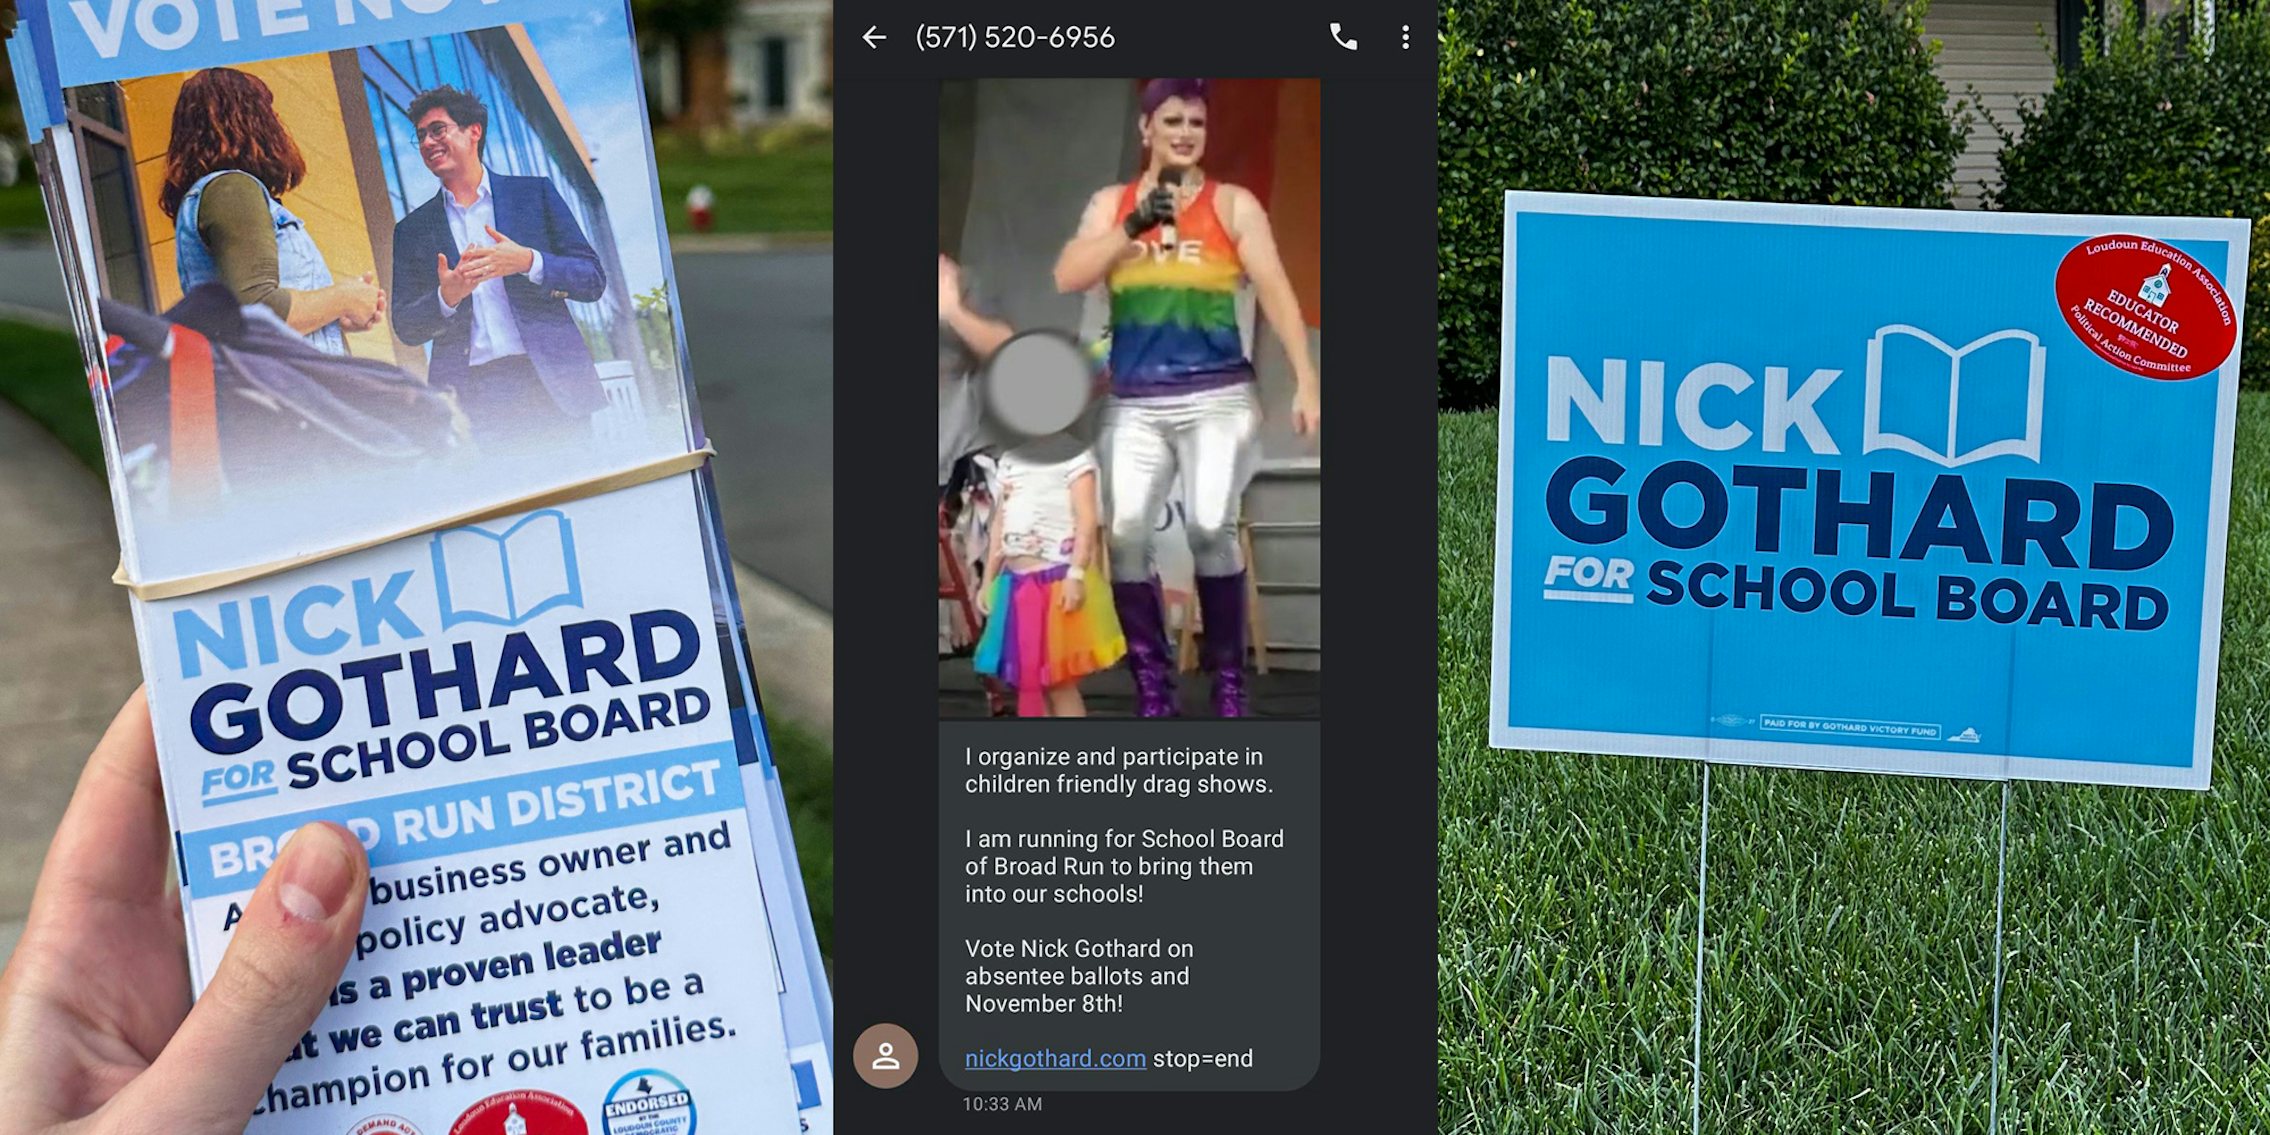 hand holding Nick Gothard for School Board flyers (l) text message with drag performer and small child (c) Nick Gothard for School Board sign (r)